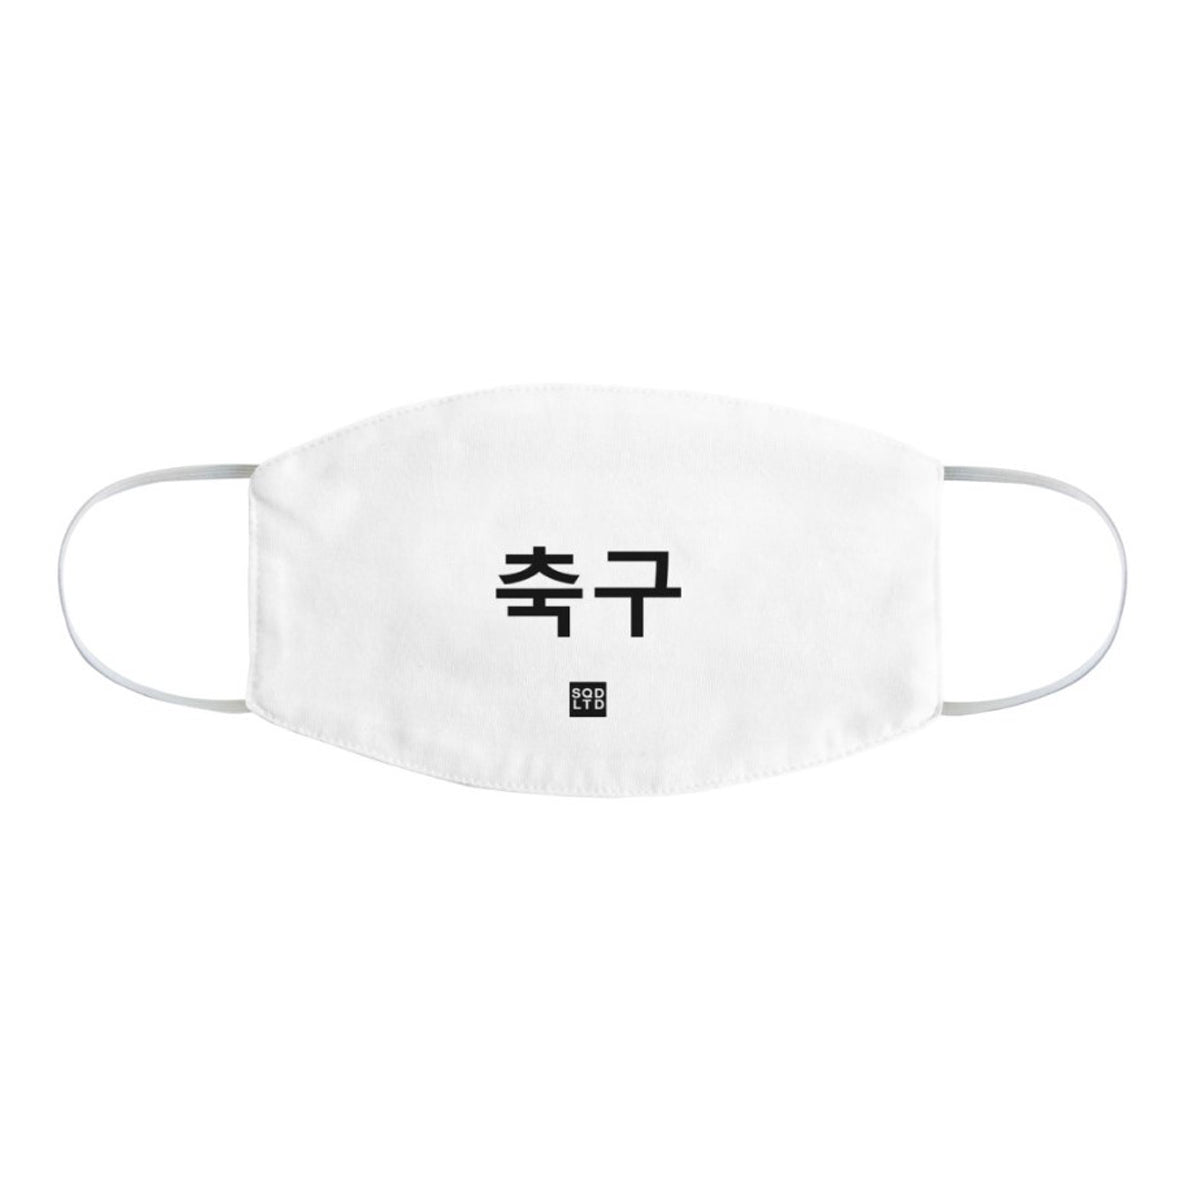 KOR Soccer Face Mask BL by Squared Limited